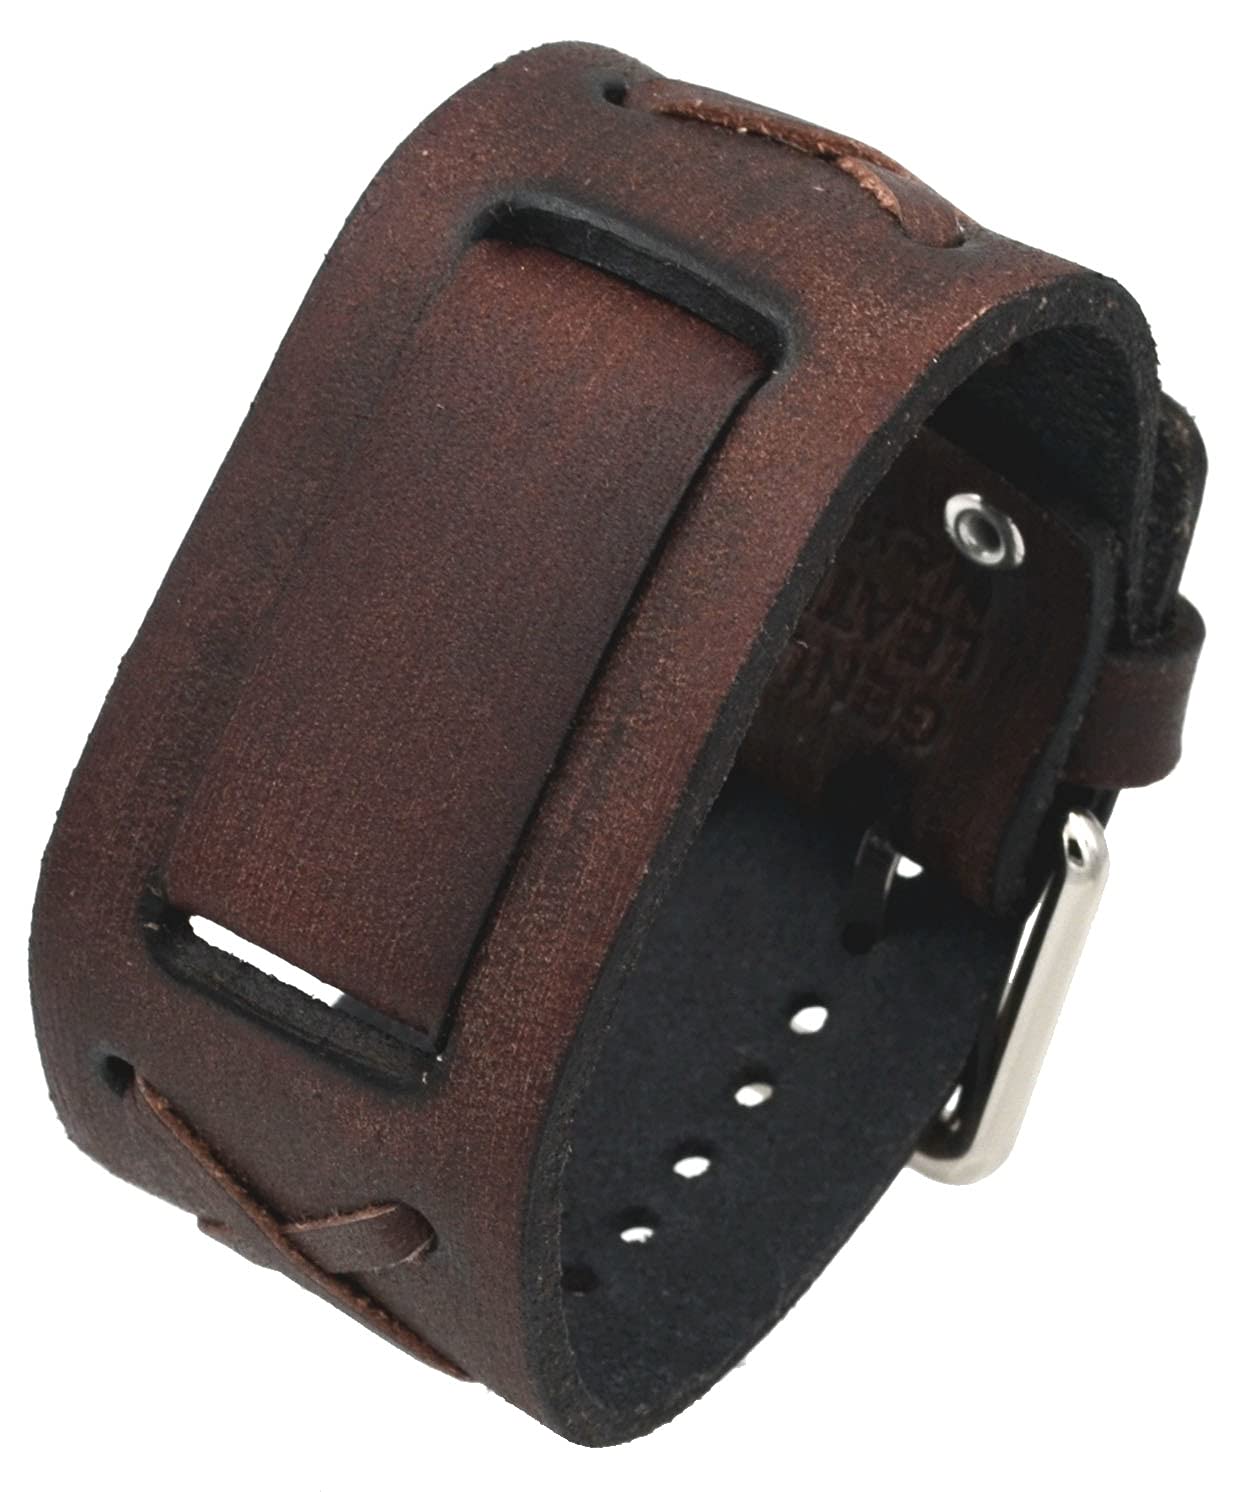 Nemesis #BFXBB Vintage Charcoal Brown Criss Cross Wide Leather Cuff Watch Wrist Band